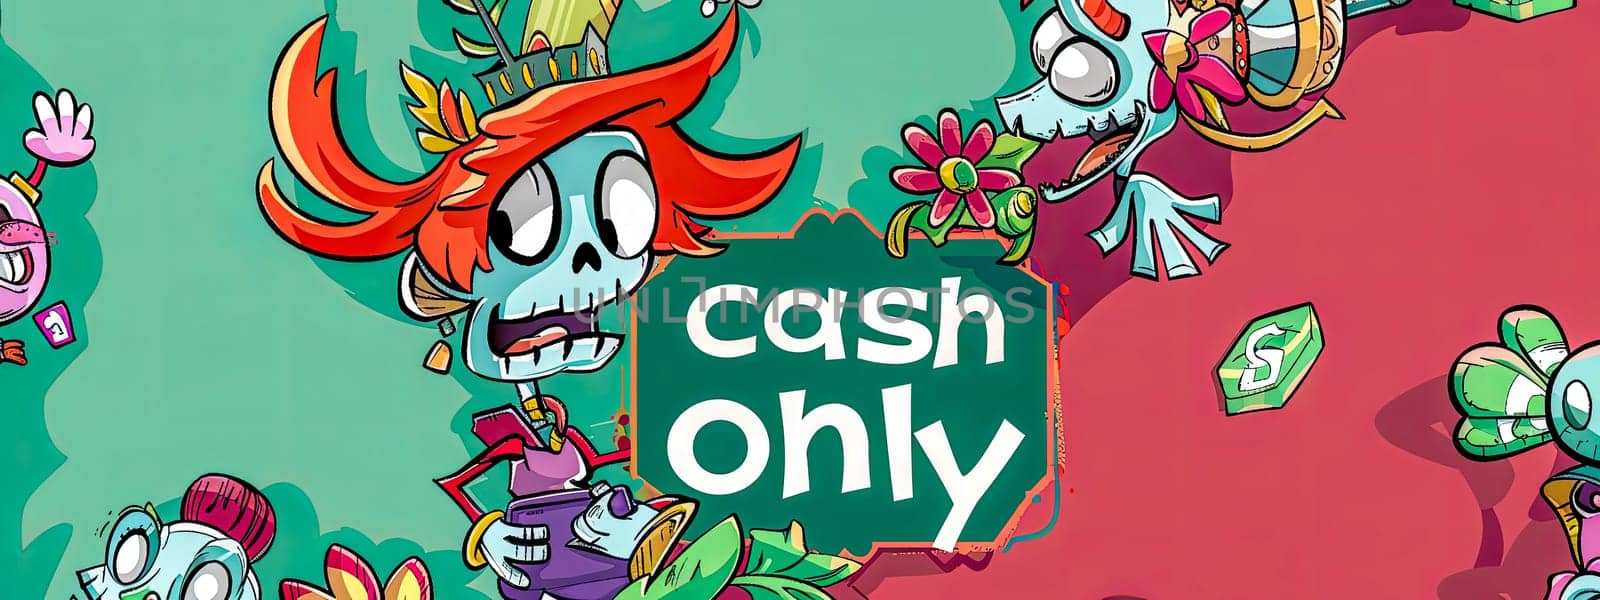 Cash only concept artwork with cartoon characters by Edophoto